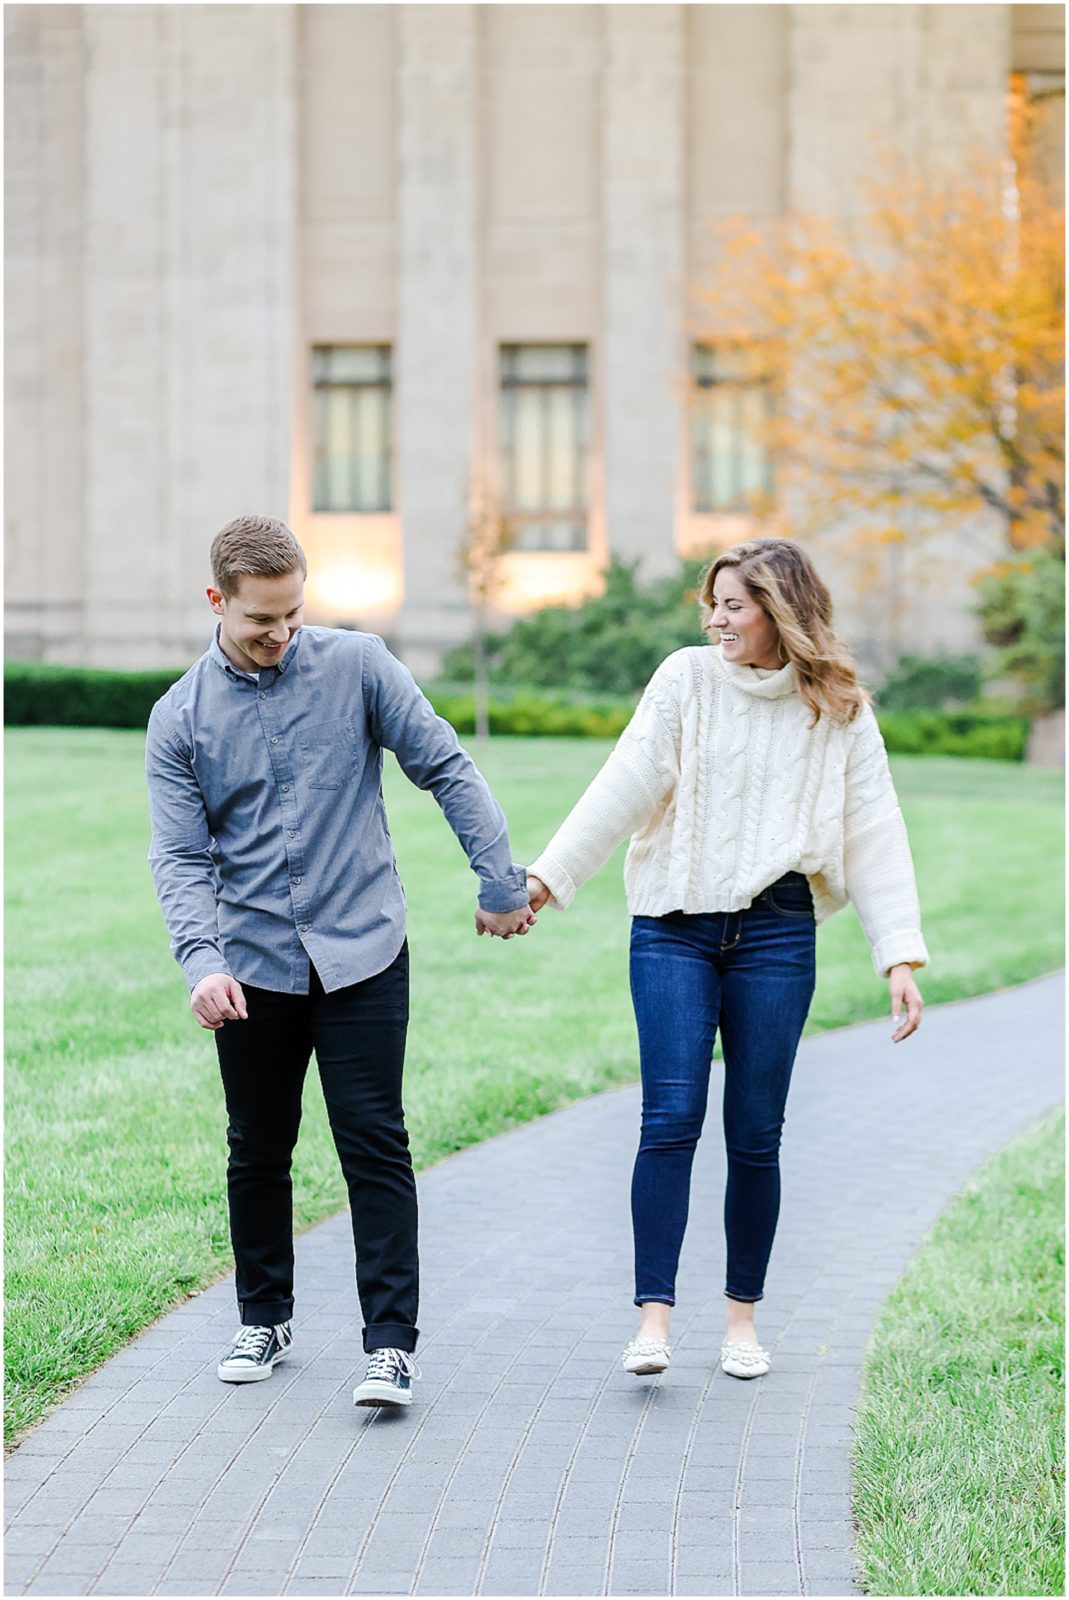 bumping hips ideas of how to take photos - Kansas City Engagement Photos & Wedding Photographer - Nelson Atkins Museum - Location ideas of where to take photos - Oakwood Country Club Wedding Photographer - engagement session